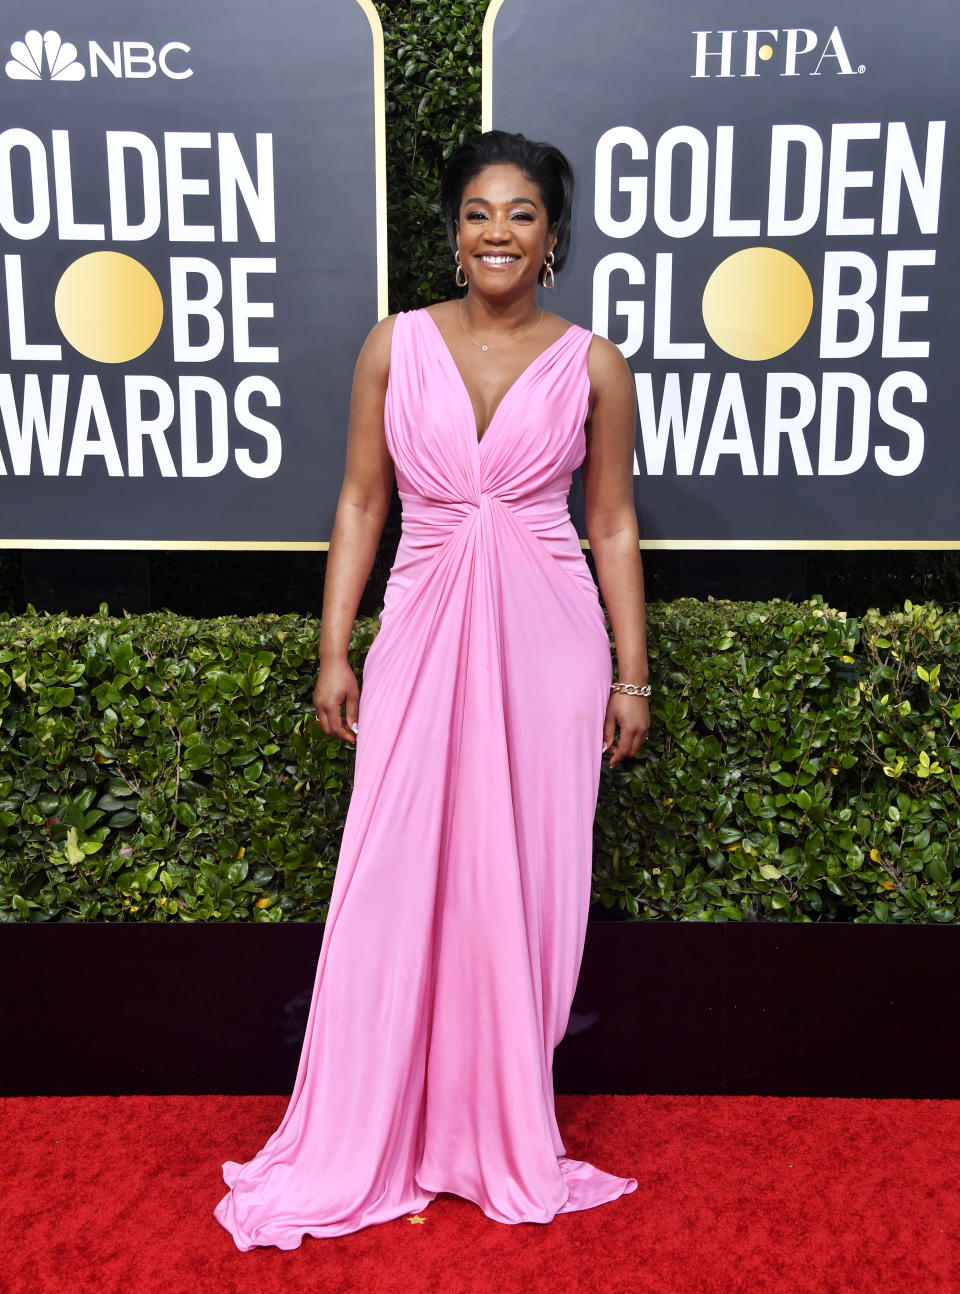 BEVERLY HILLS, CALIFORNIA - JANUARY 05: Tiffany Haddish attends the 77th Annual Golden Globe Awards at The Beverly Hilton Hotel on January 05, 2020 in Beverly Hills, California. (Photo by Frazer Harrison/Getty Images)